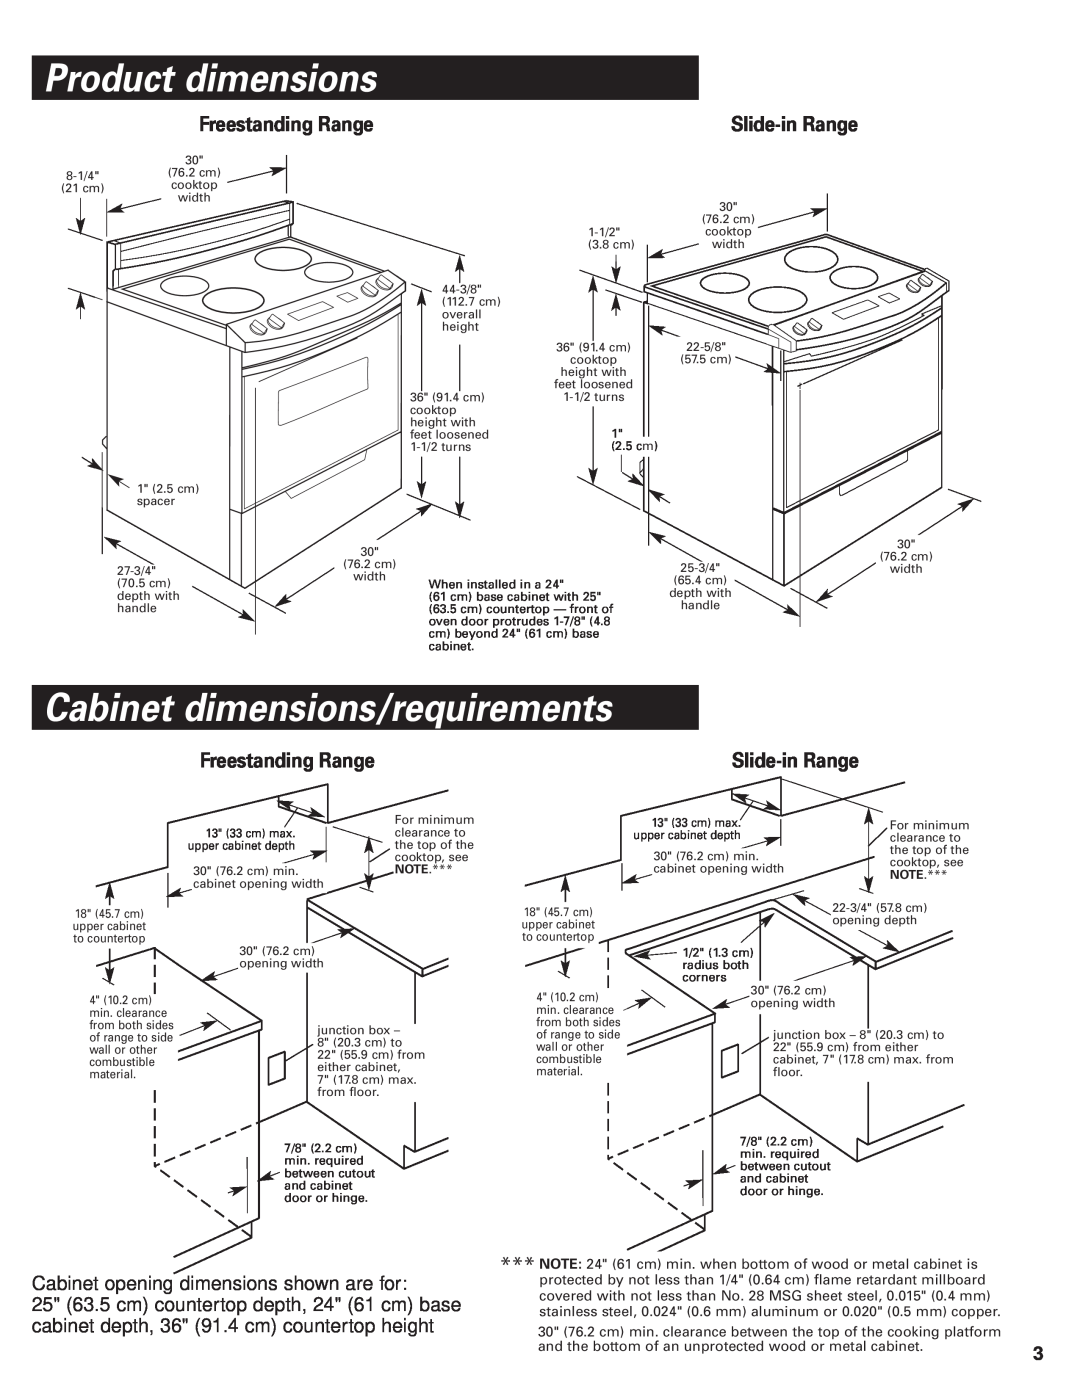 KitchenAid Convection Oven Product dimensions, Cabinet dimensions/requirements, Slide-in Range, Freestanding Range 